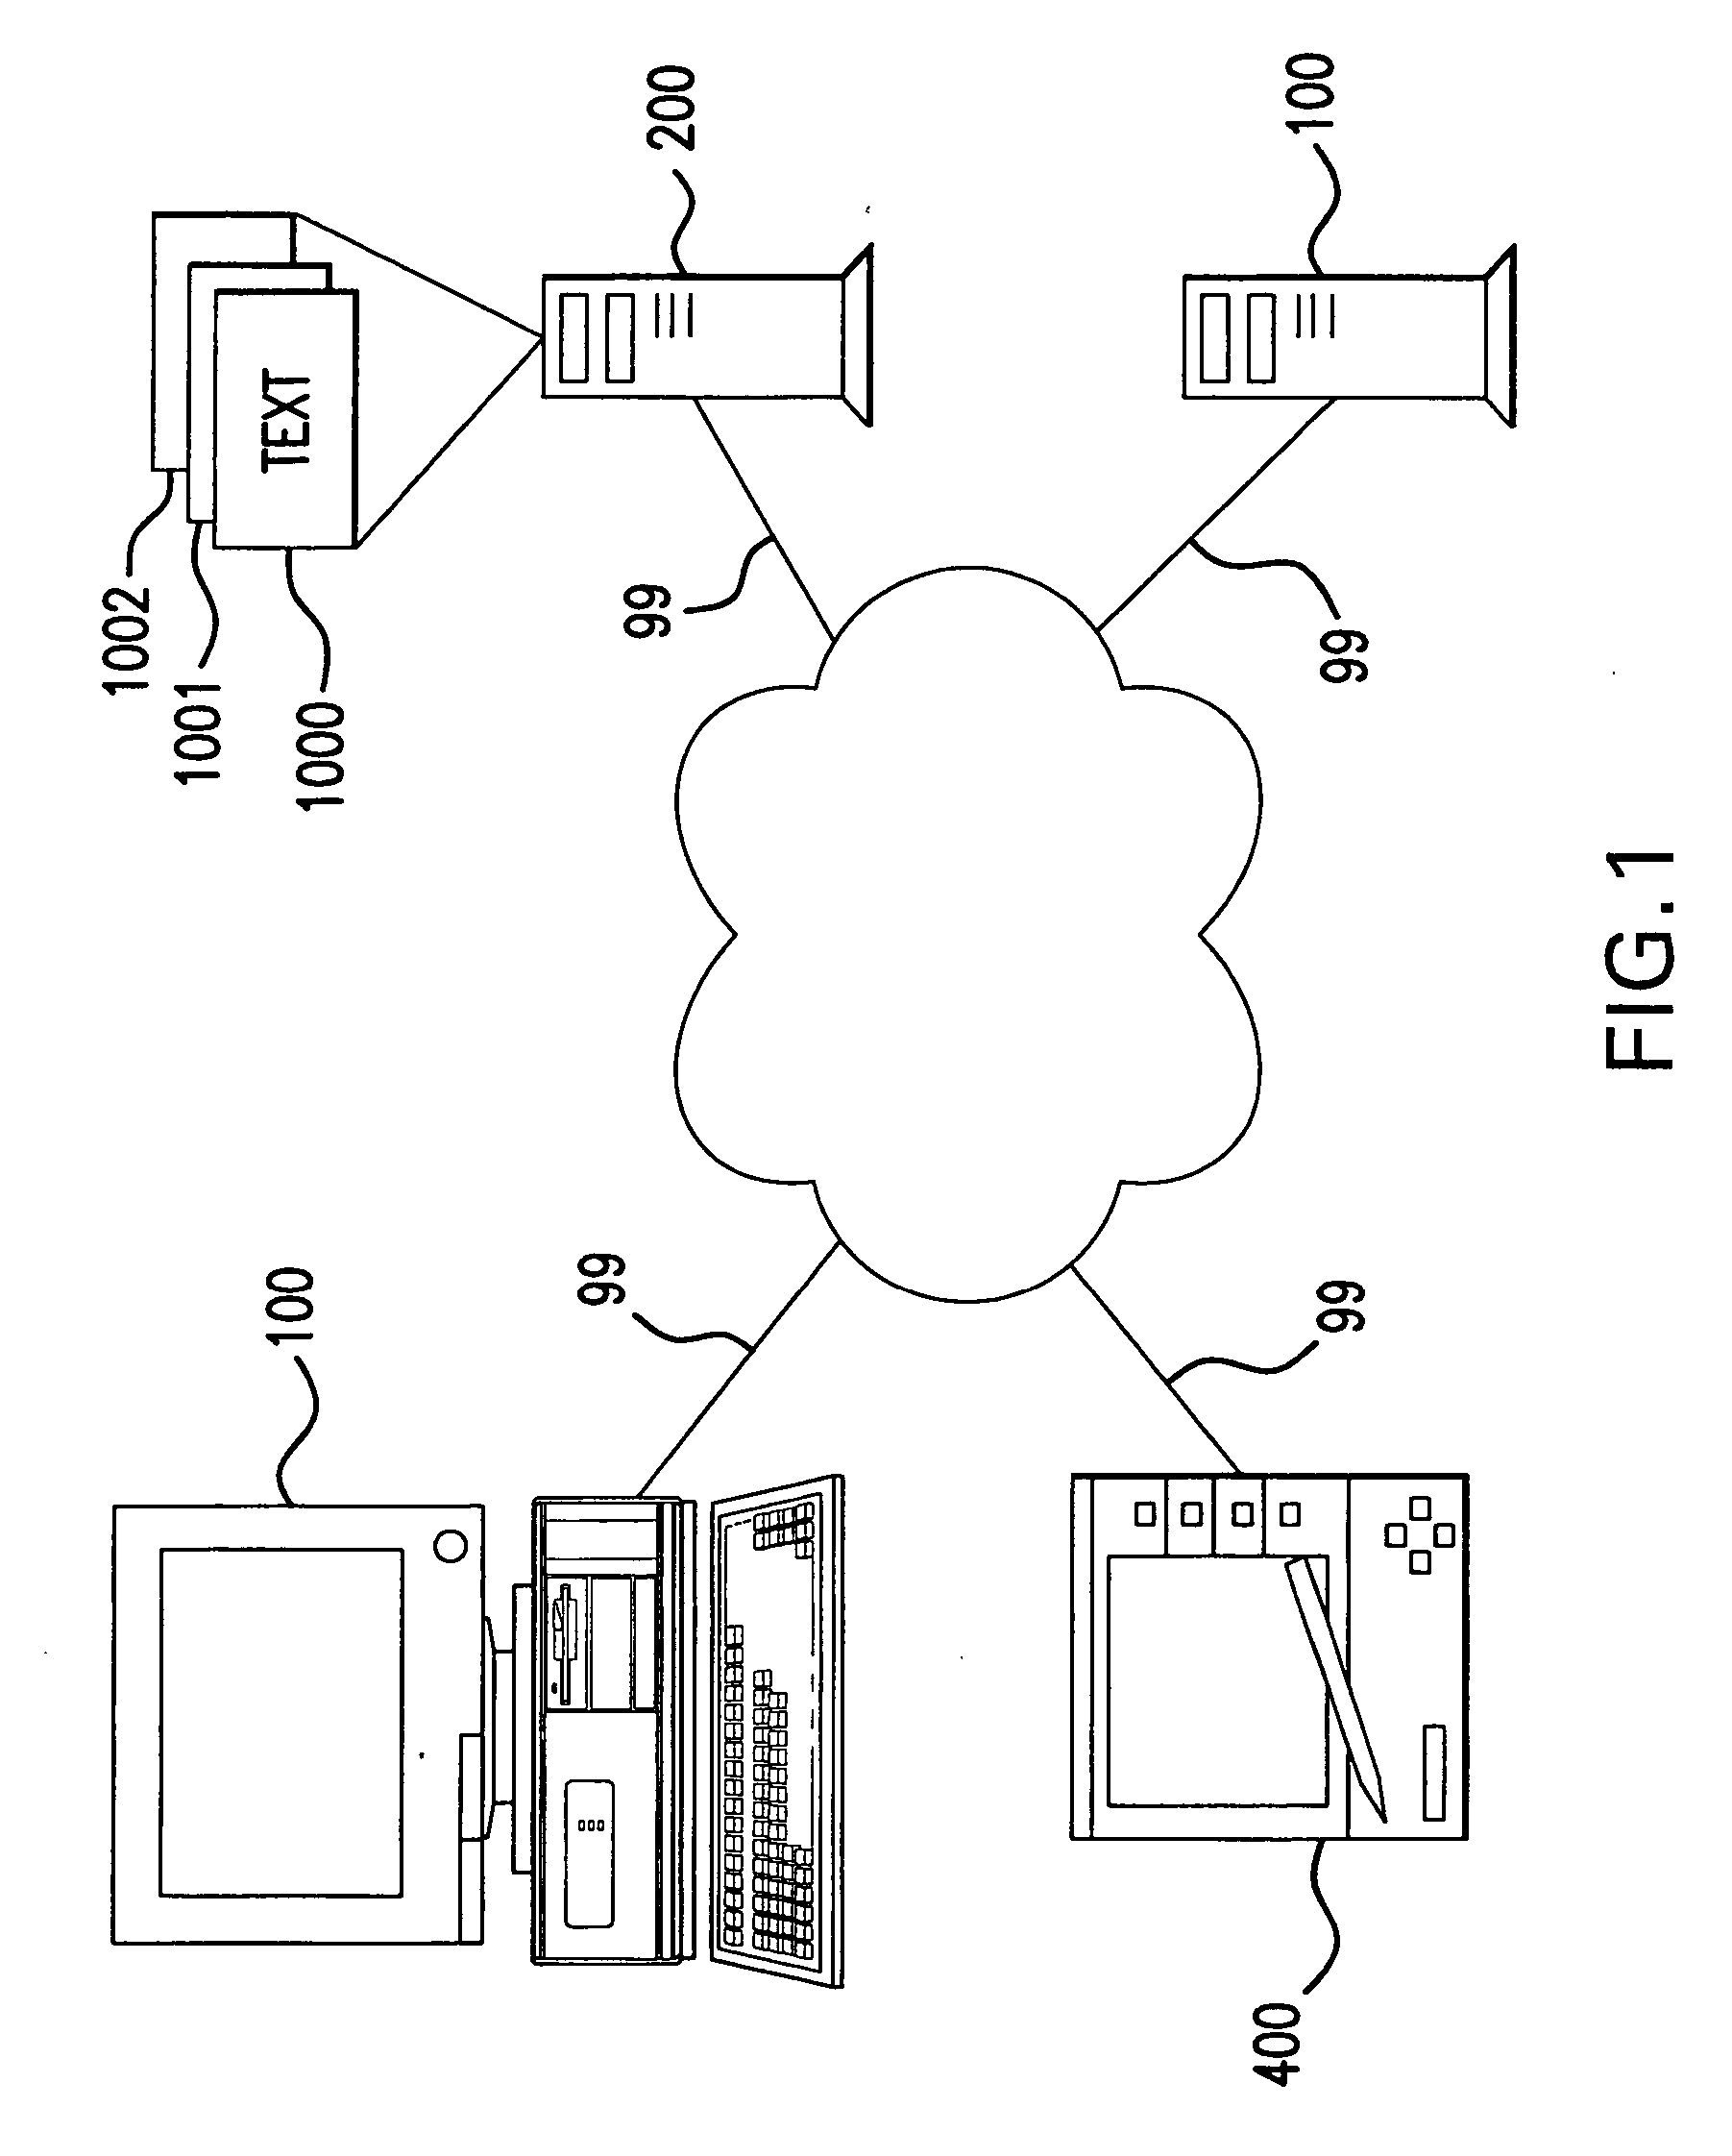 Systems and methods for determining predictive models of discourse functions